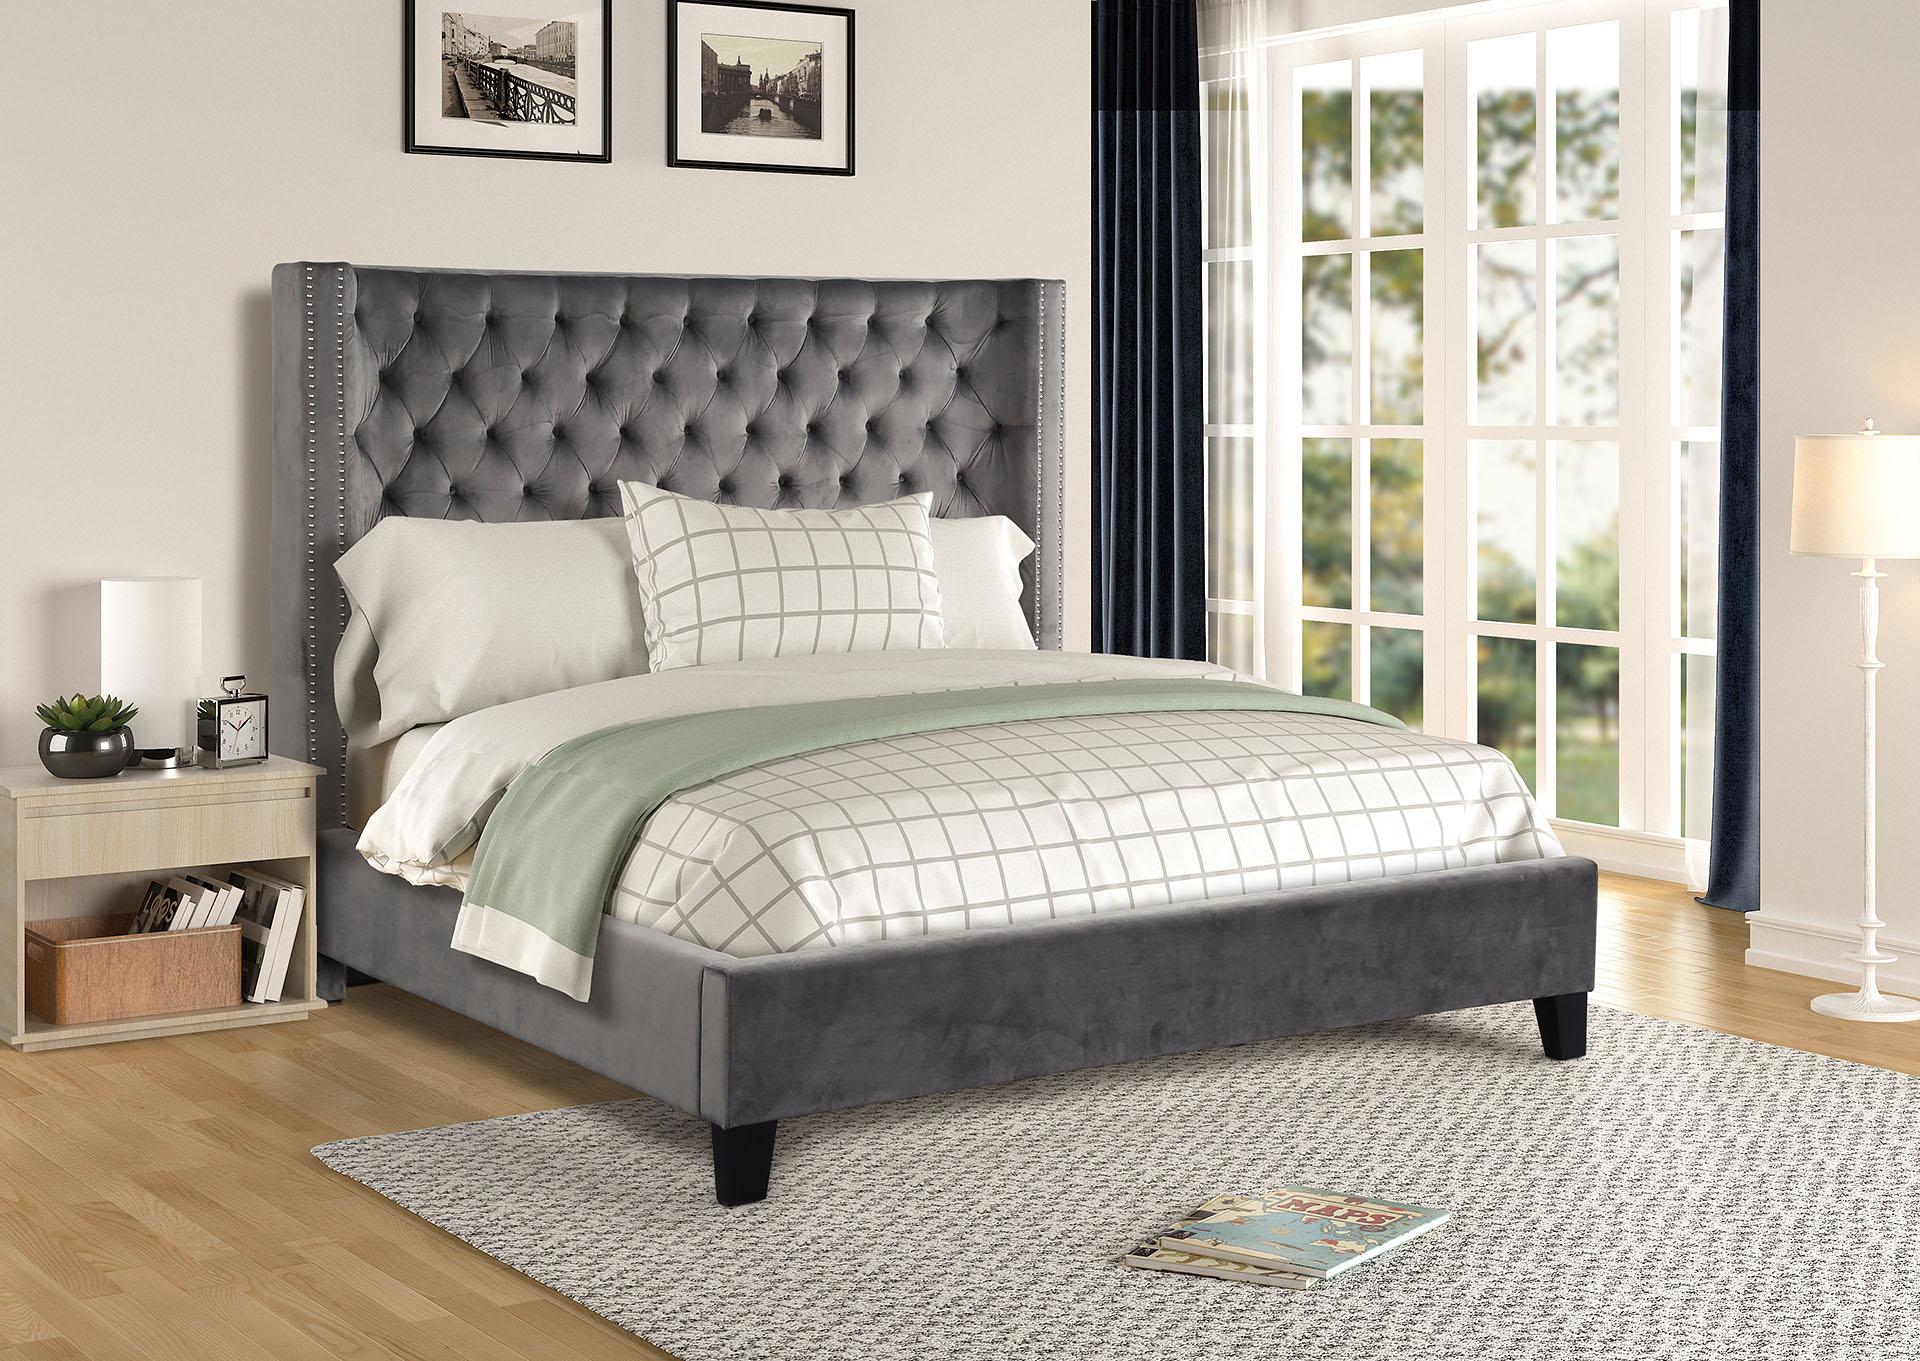 Contemporary, Modern Panel Bed ALLEN GHF-808857707505 in Gray Fabric